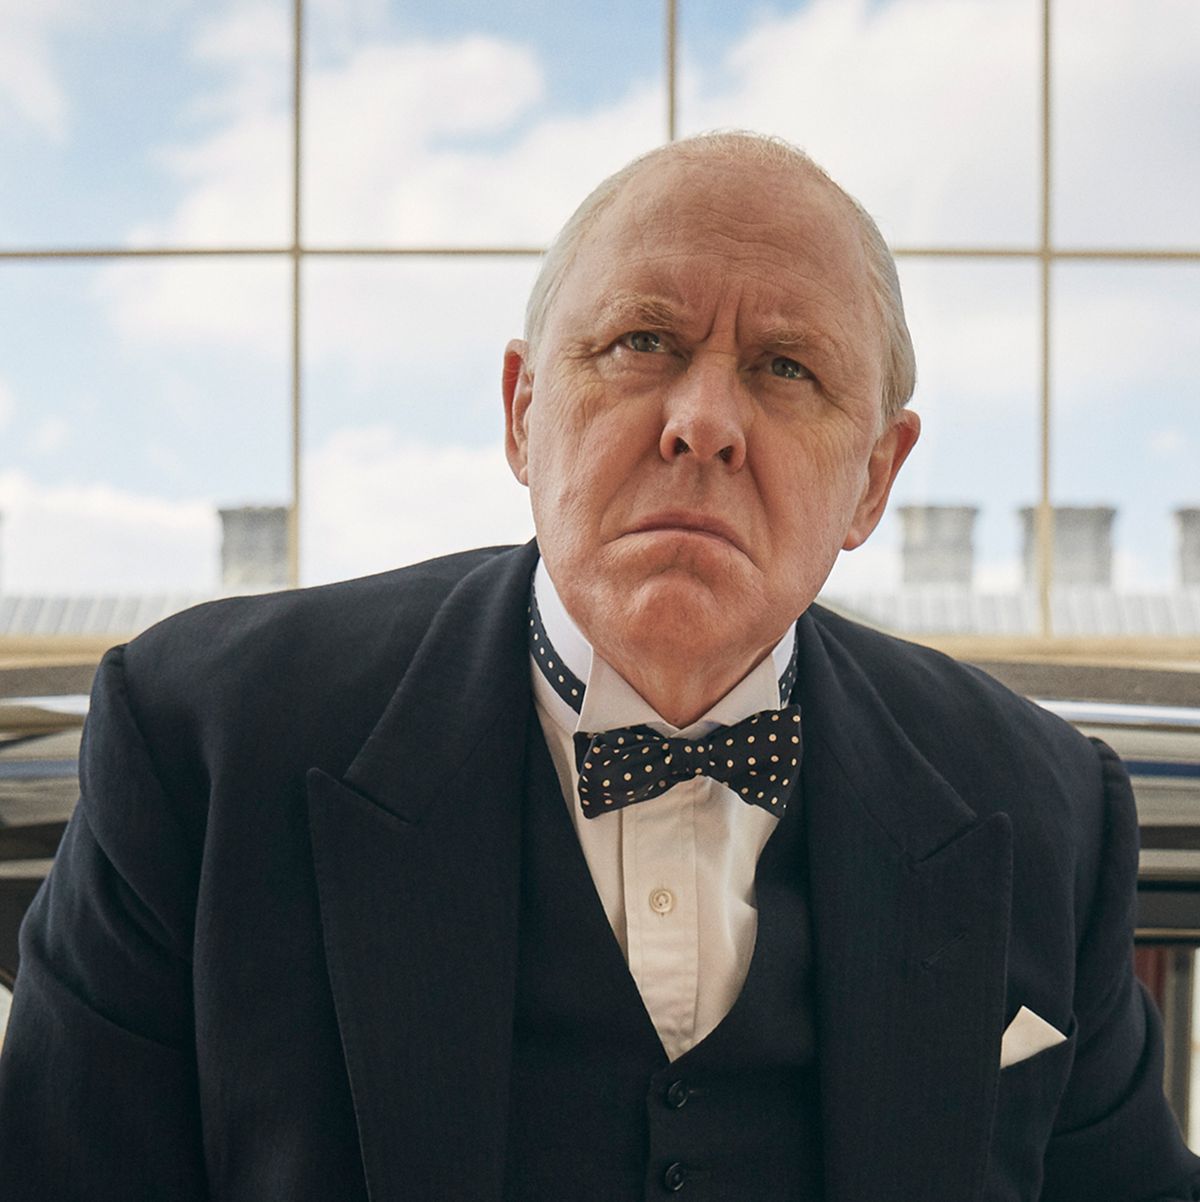 John Lithgow And Pip Torrens Return To 'The Crown' Season 3, Despite New  Cast